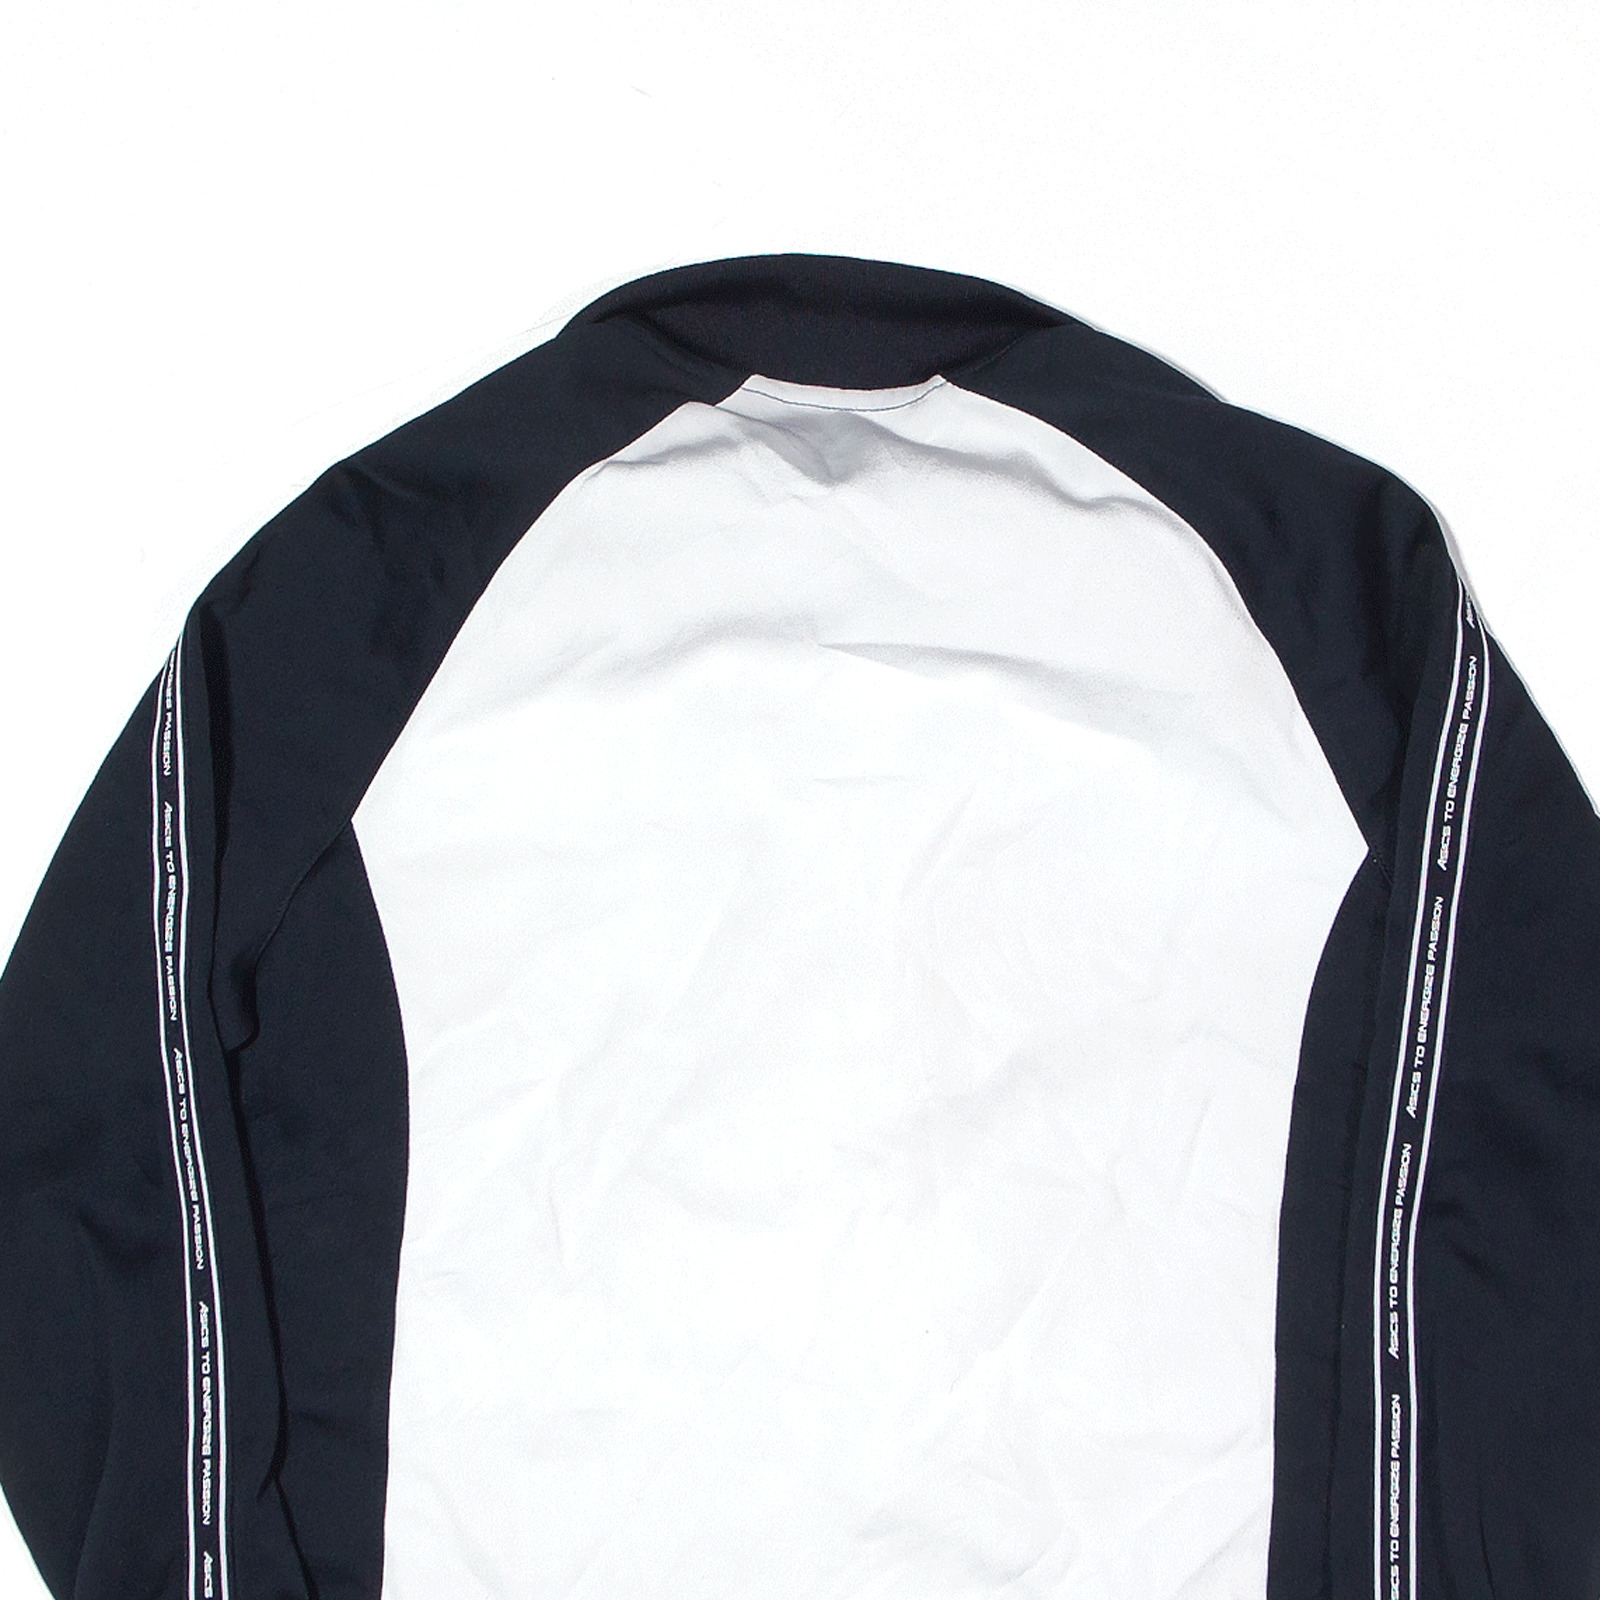 ASICS Mens Jacket White Track M - Picture 4 of 6